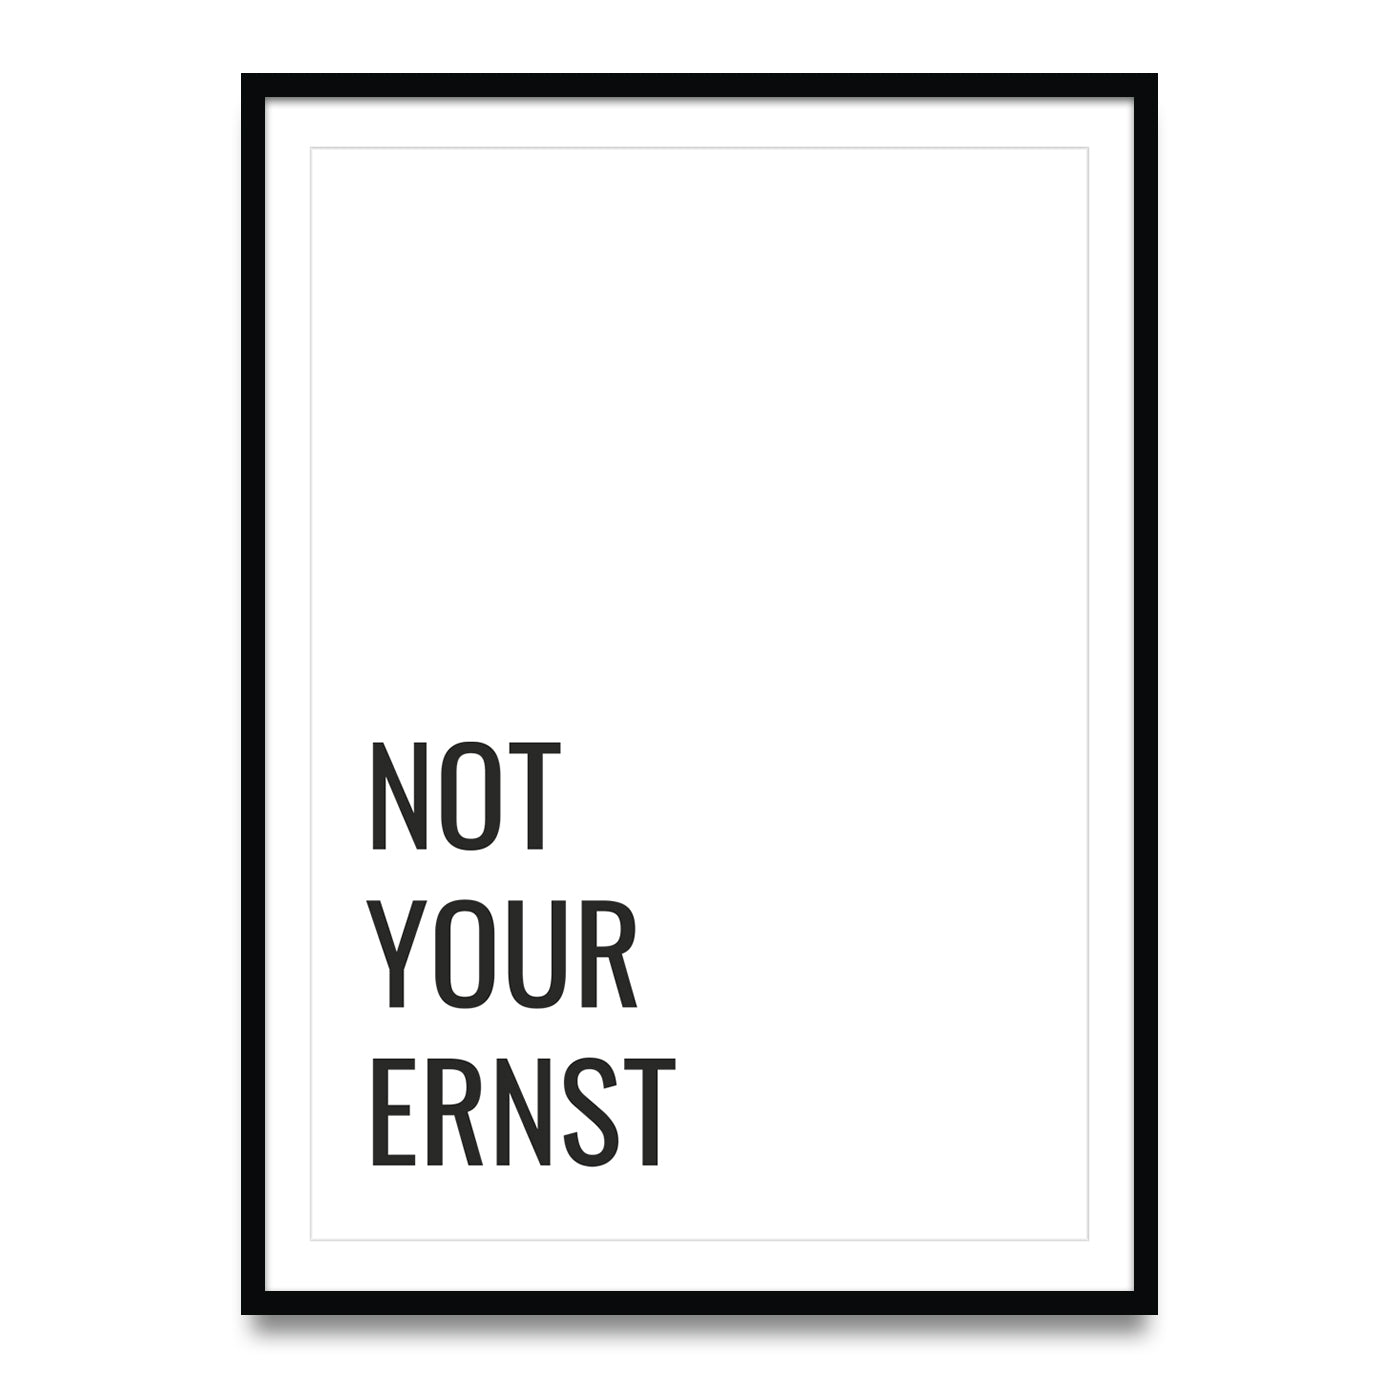 Not your ernst - Poster